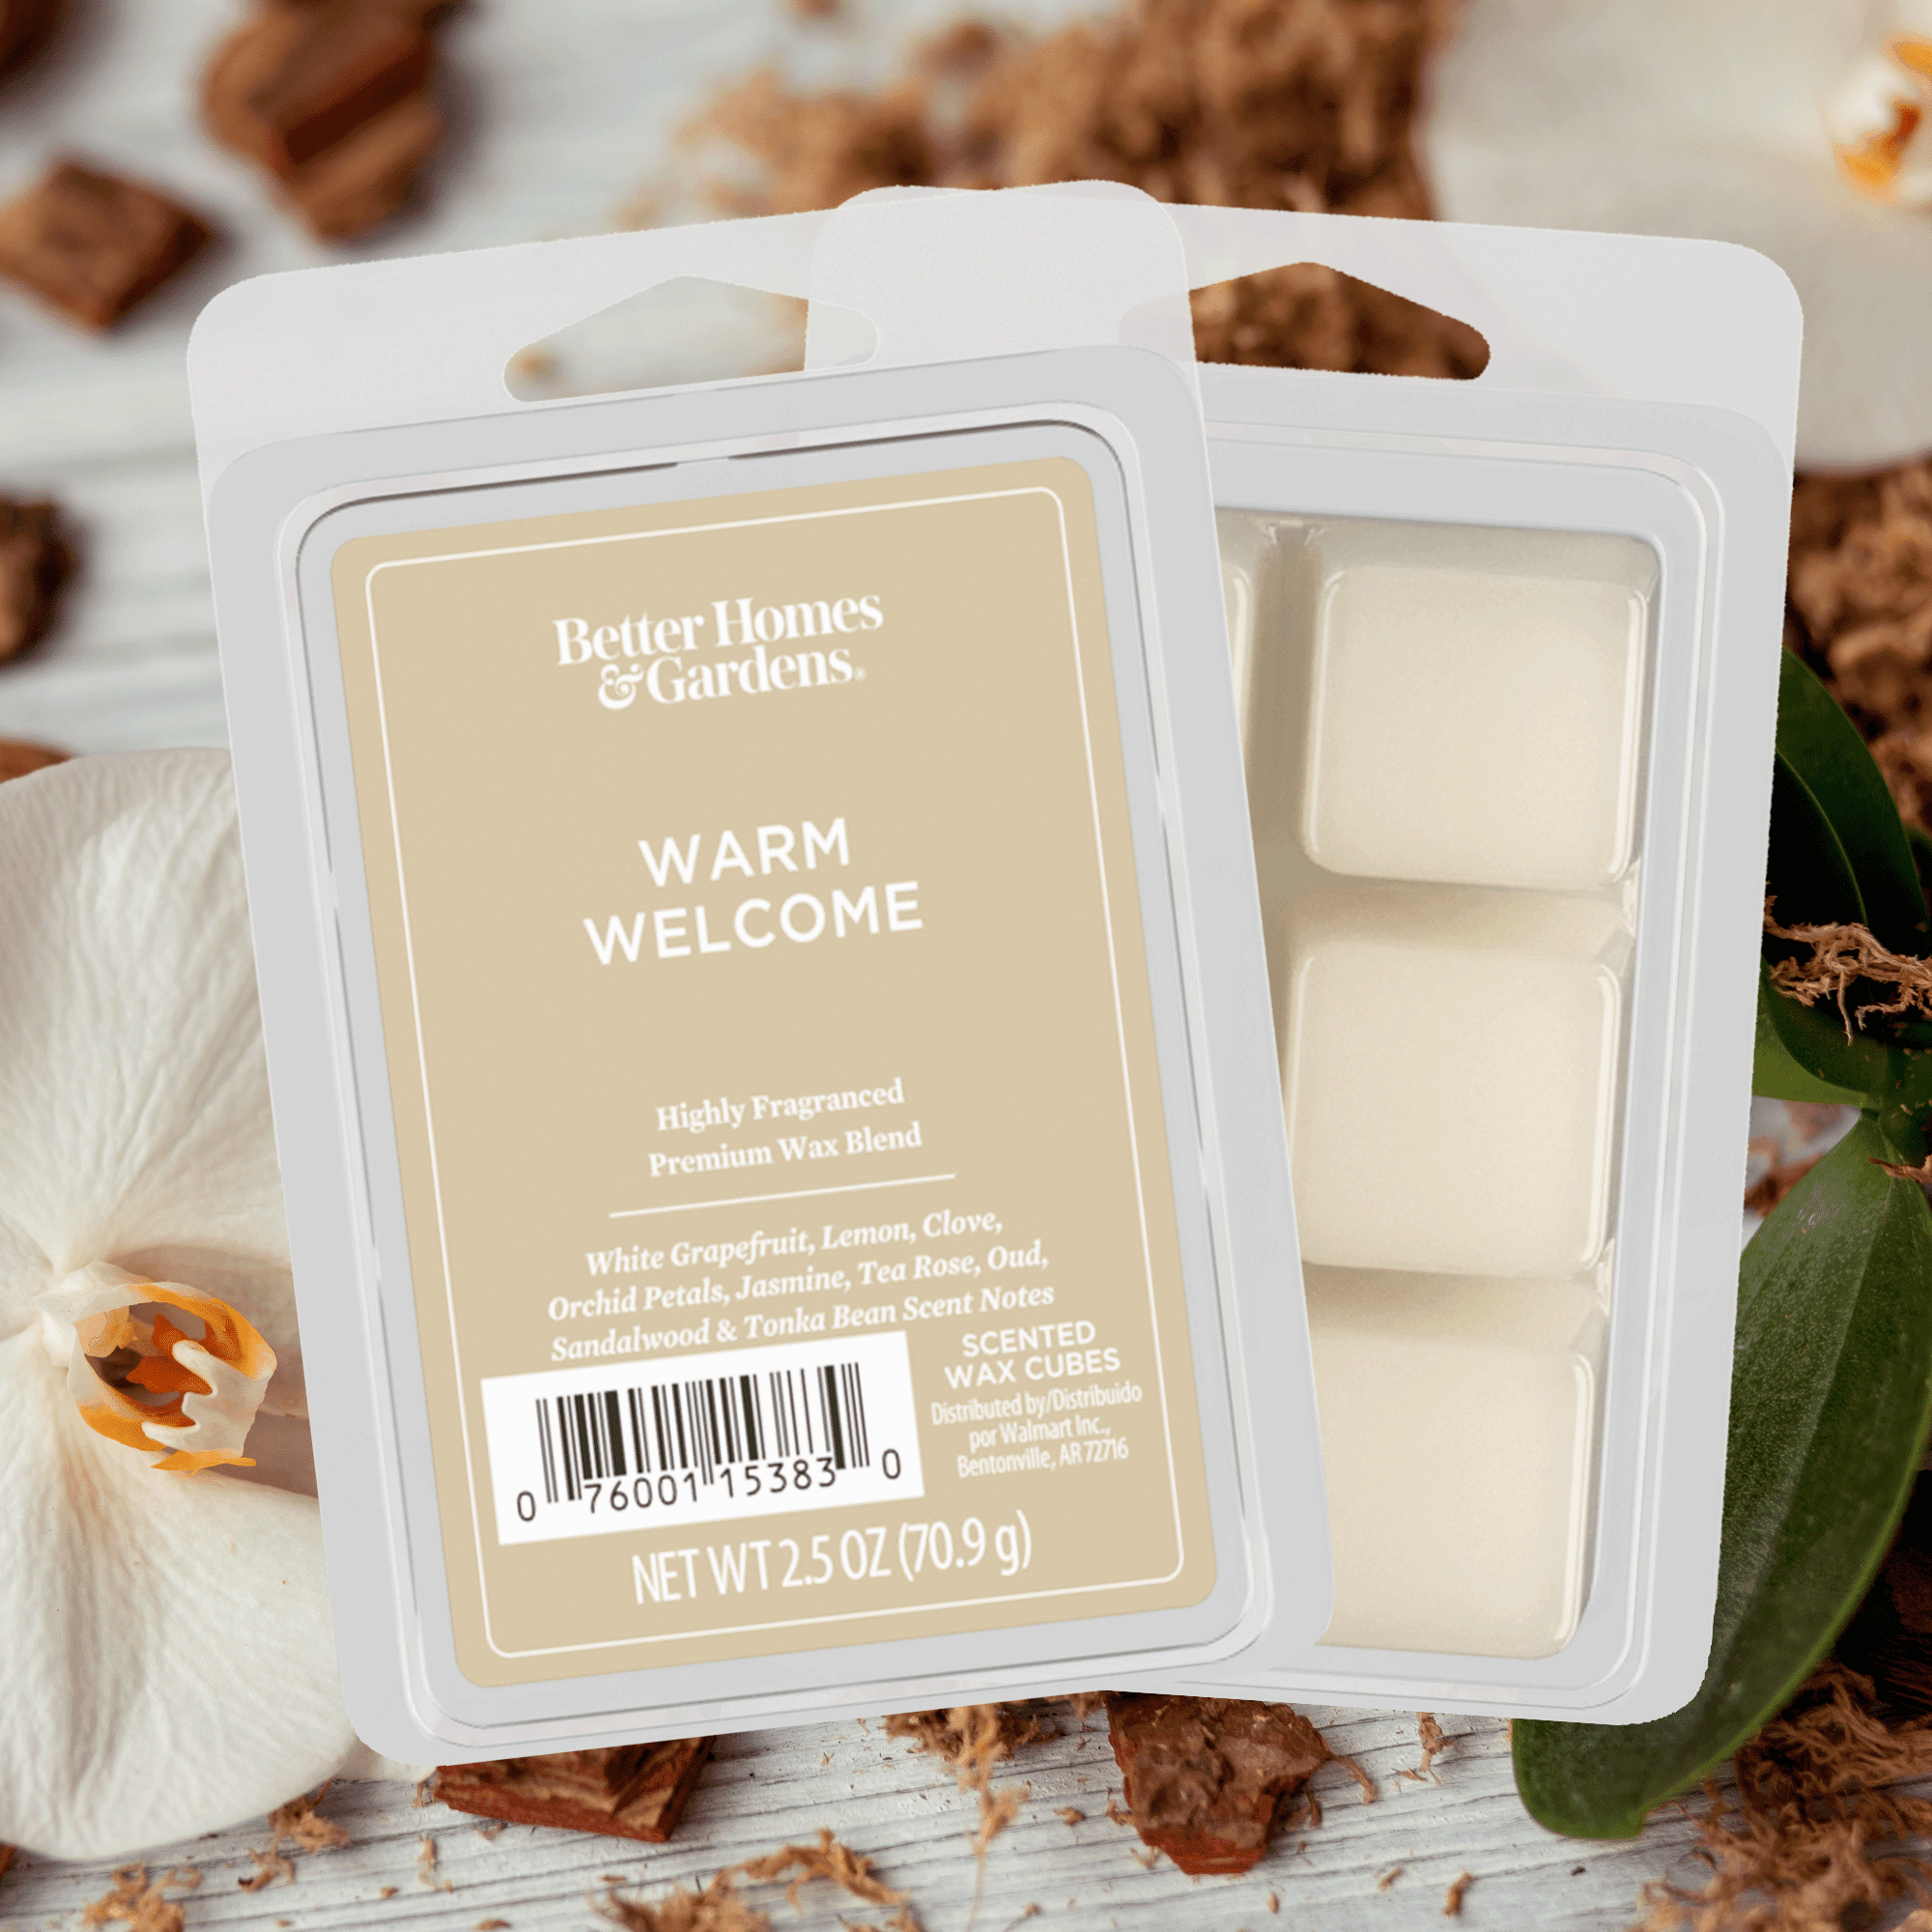 Pin by Helen on Scentsationals wax melts/bhg/other melts